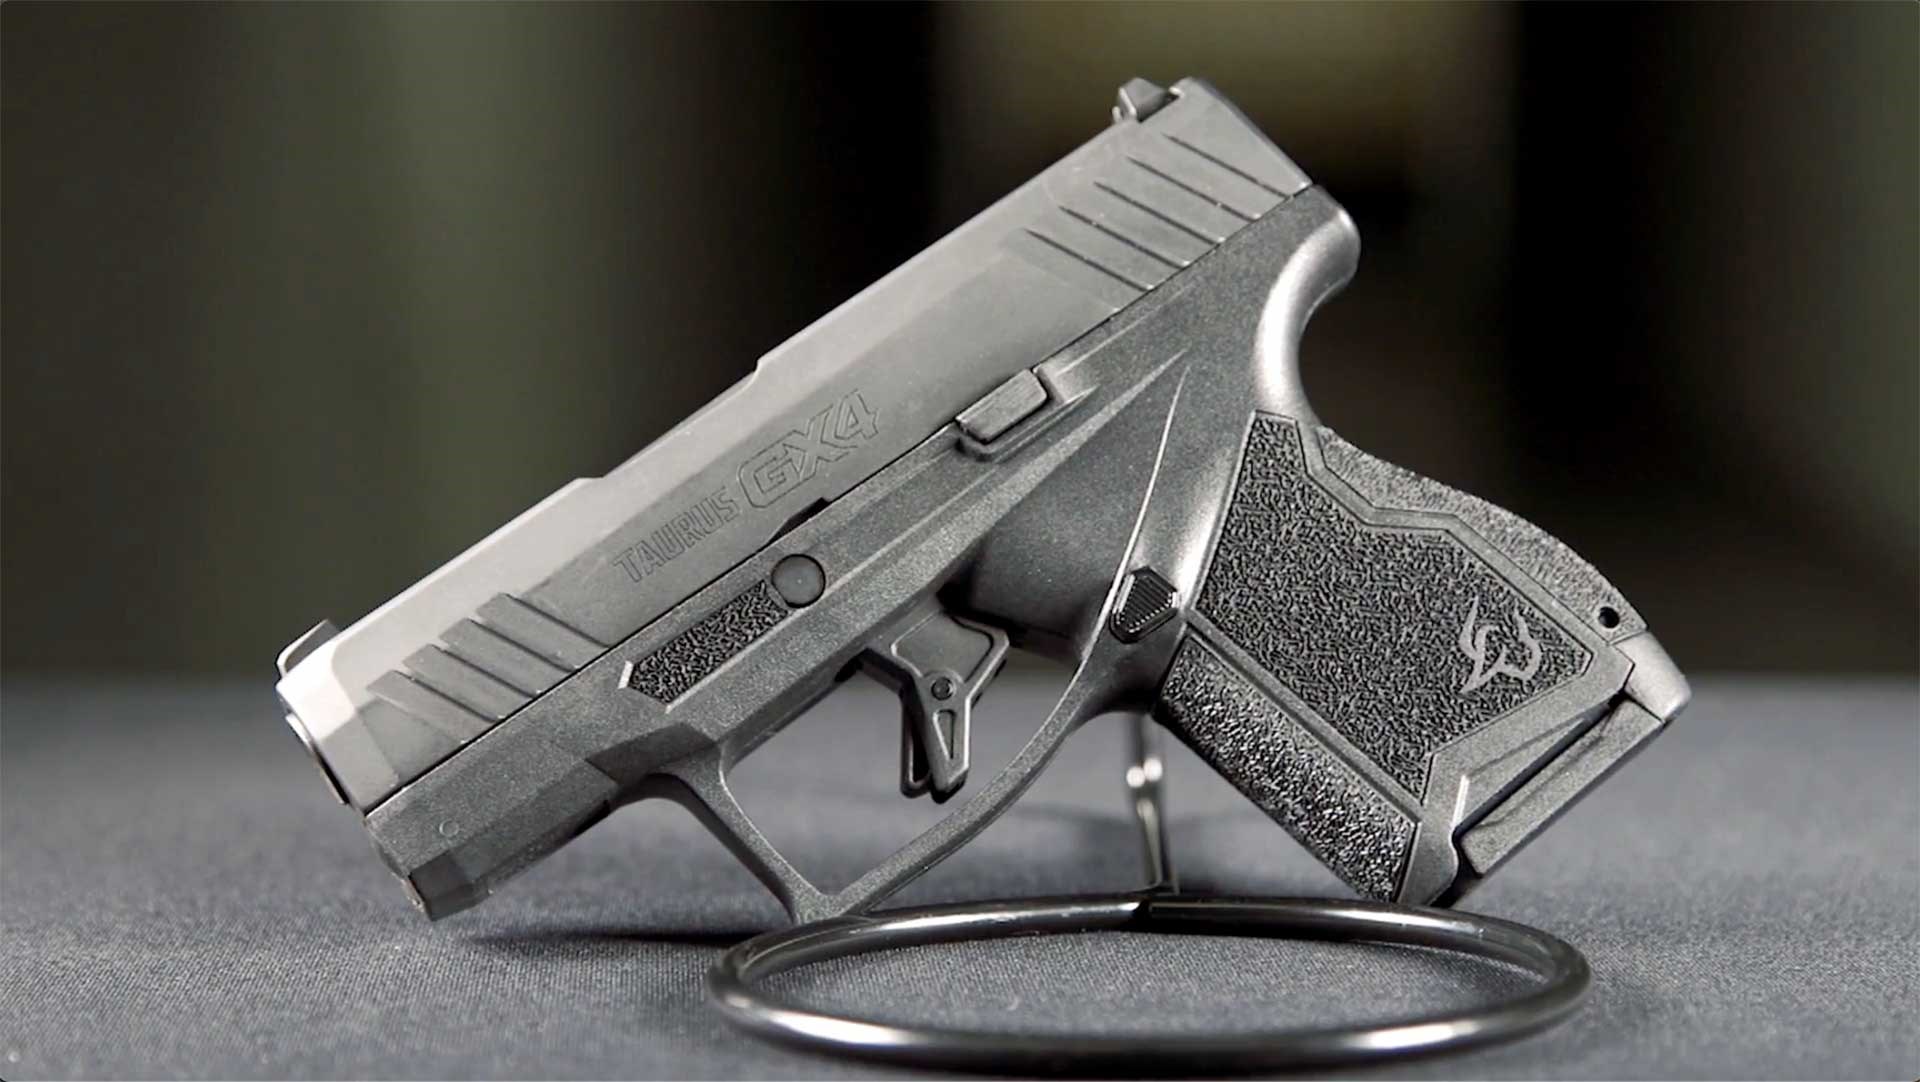 Left-side view of the Taurus GX4 concealed-carry pistol.